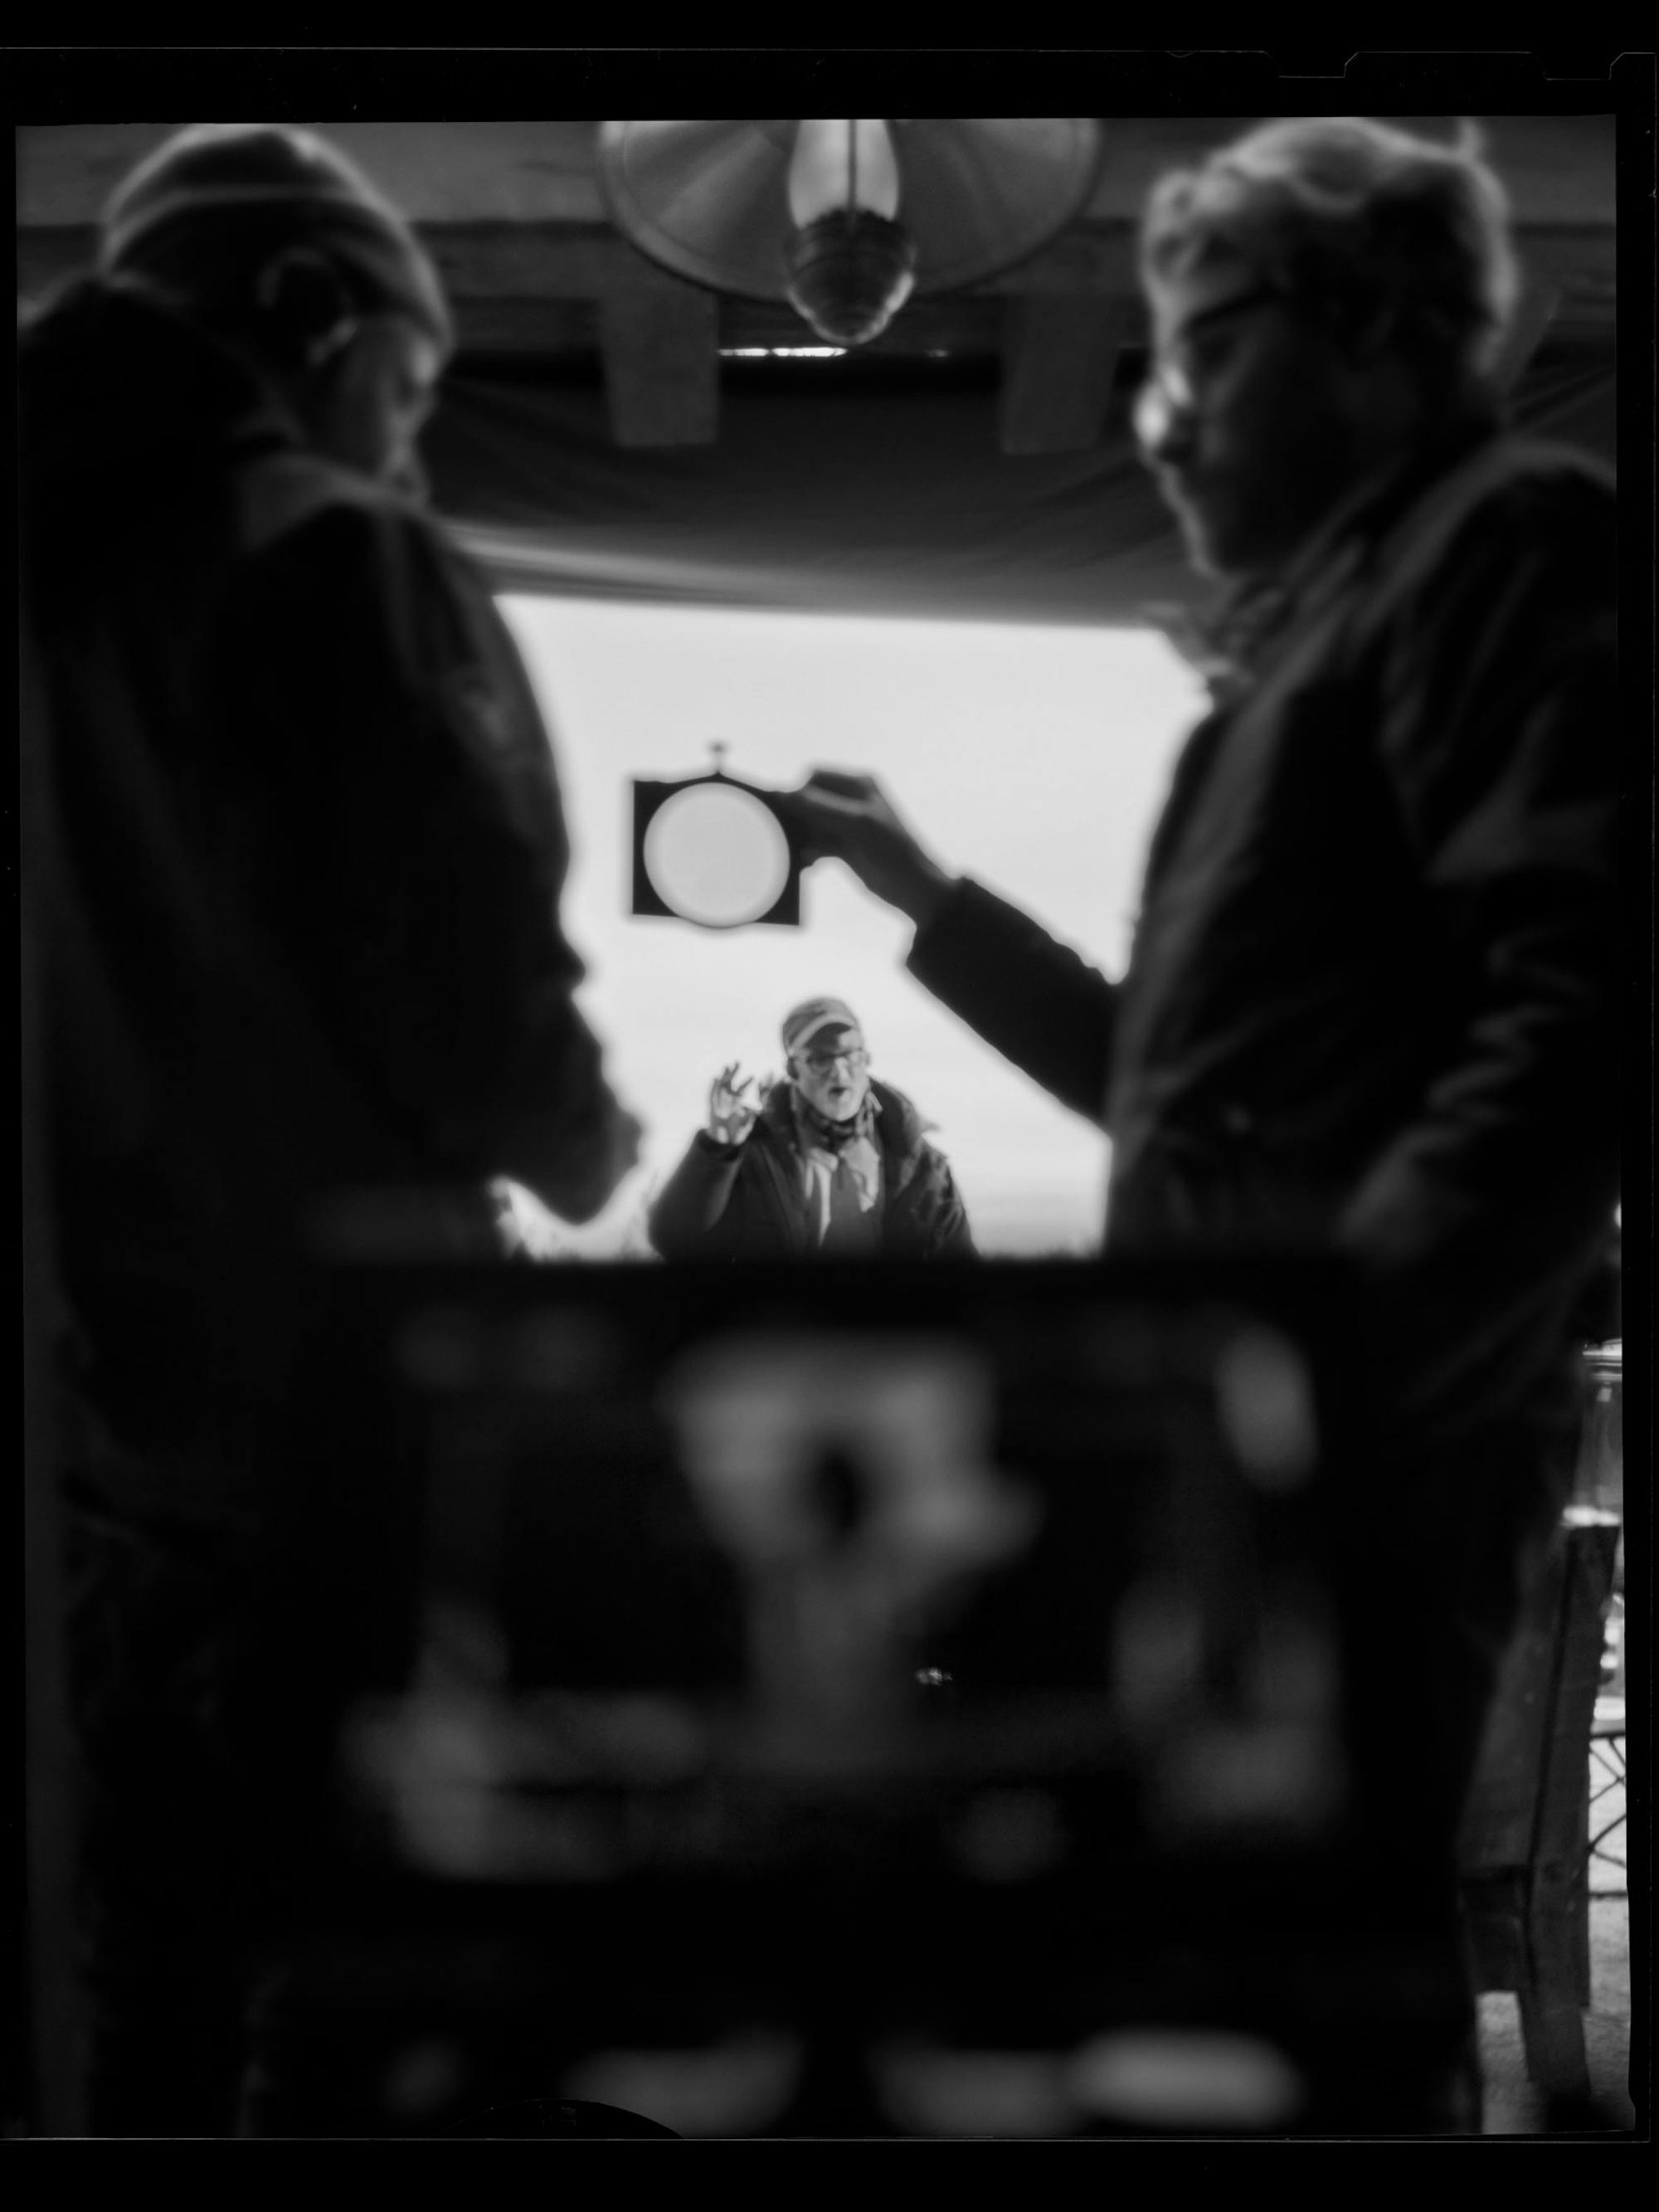 Fincher and Messerschmidt hold up a lens in this behind-the-scenes shot.